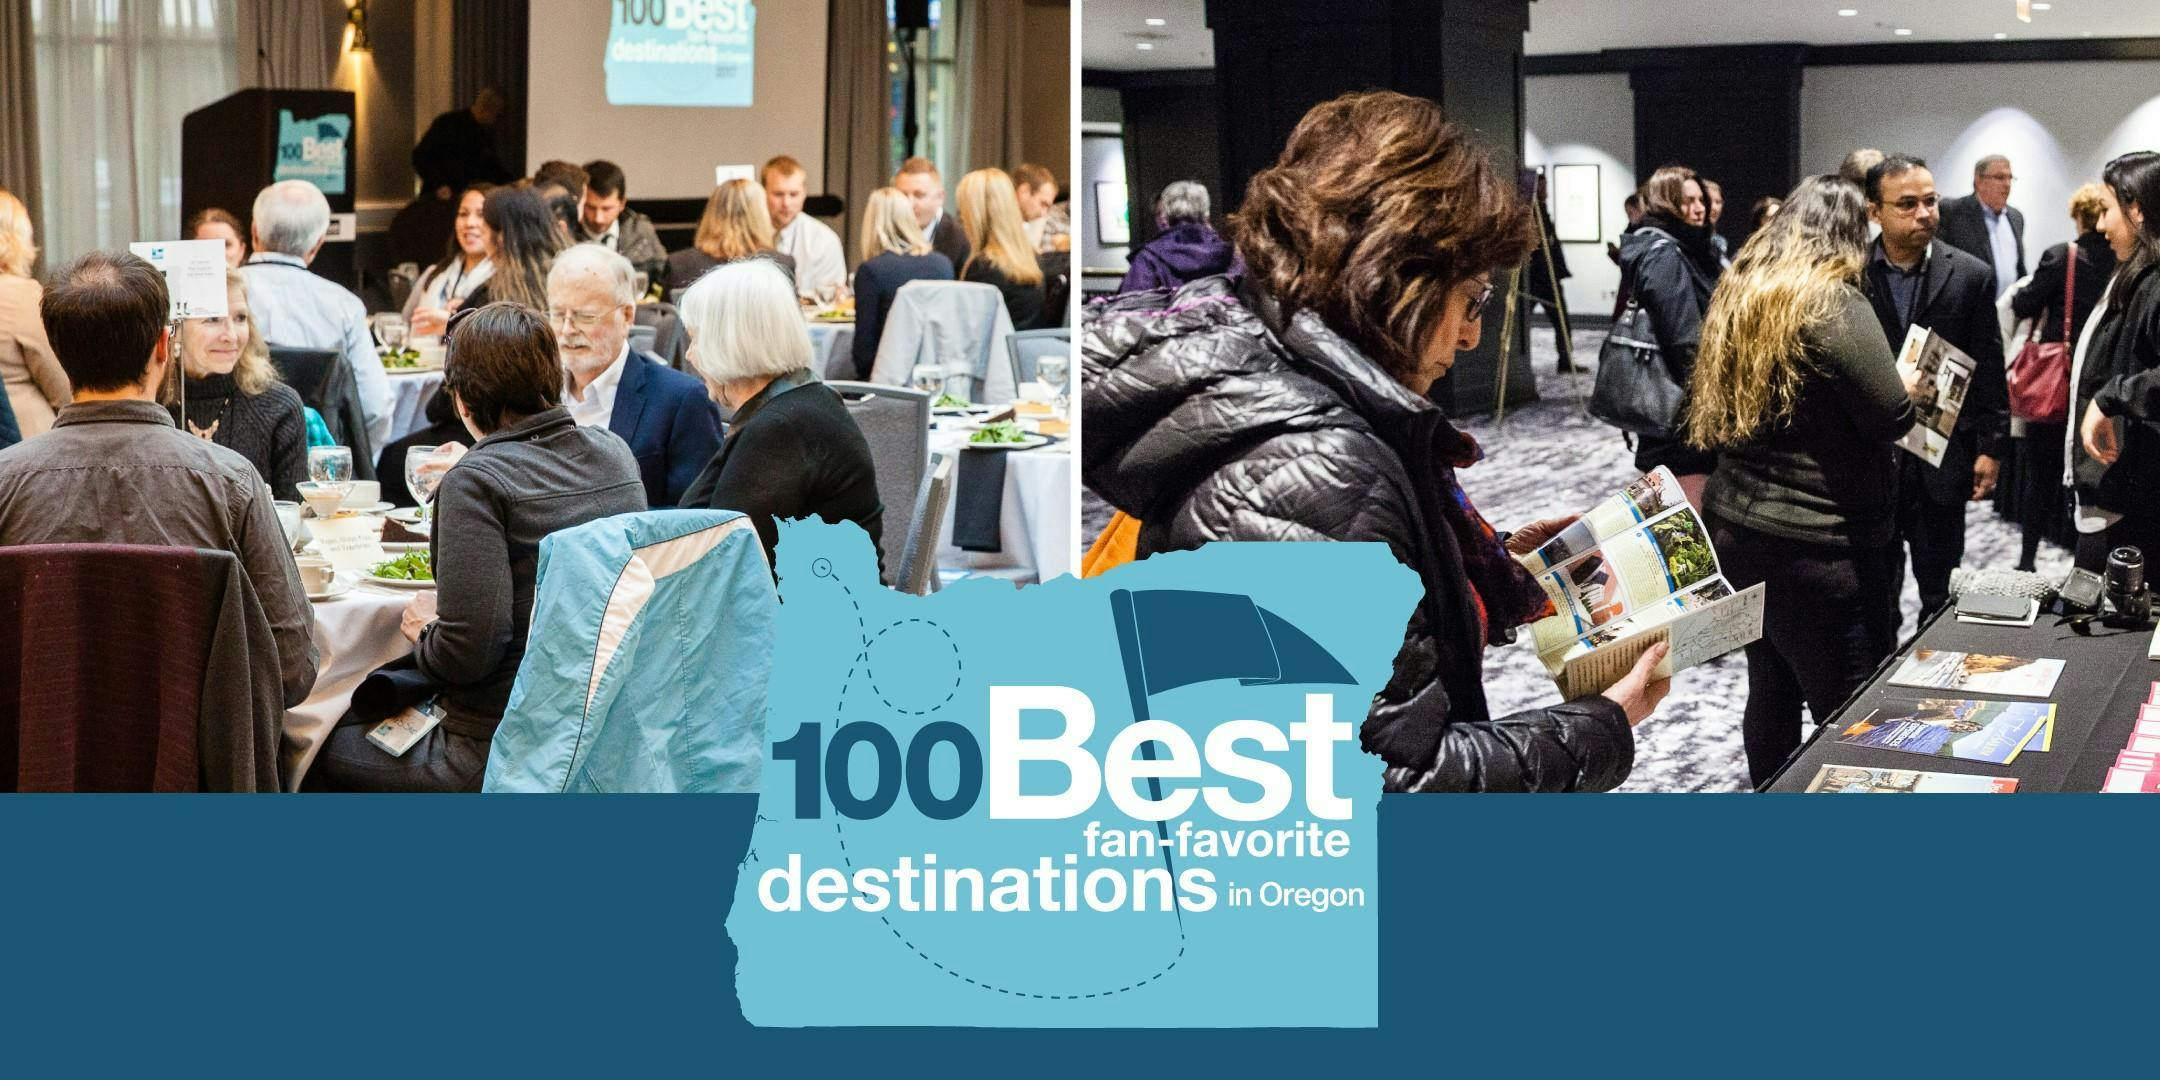 2019 100 Best Fan-Favorite Destinations in Oregon awards luncheon AND They said what?: Online-review reputation seminar